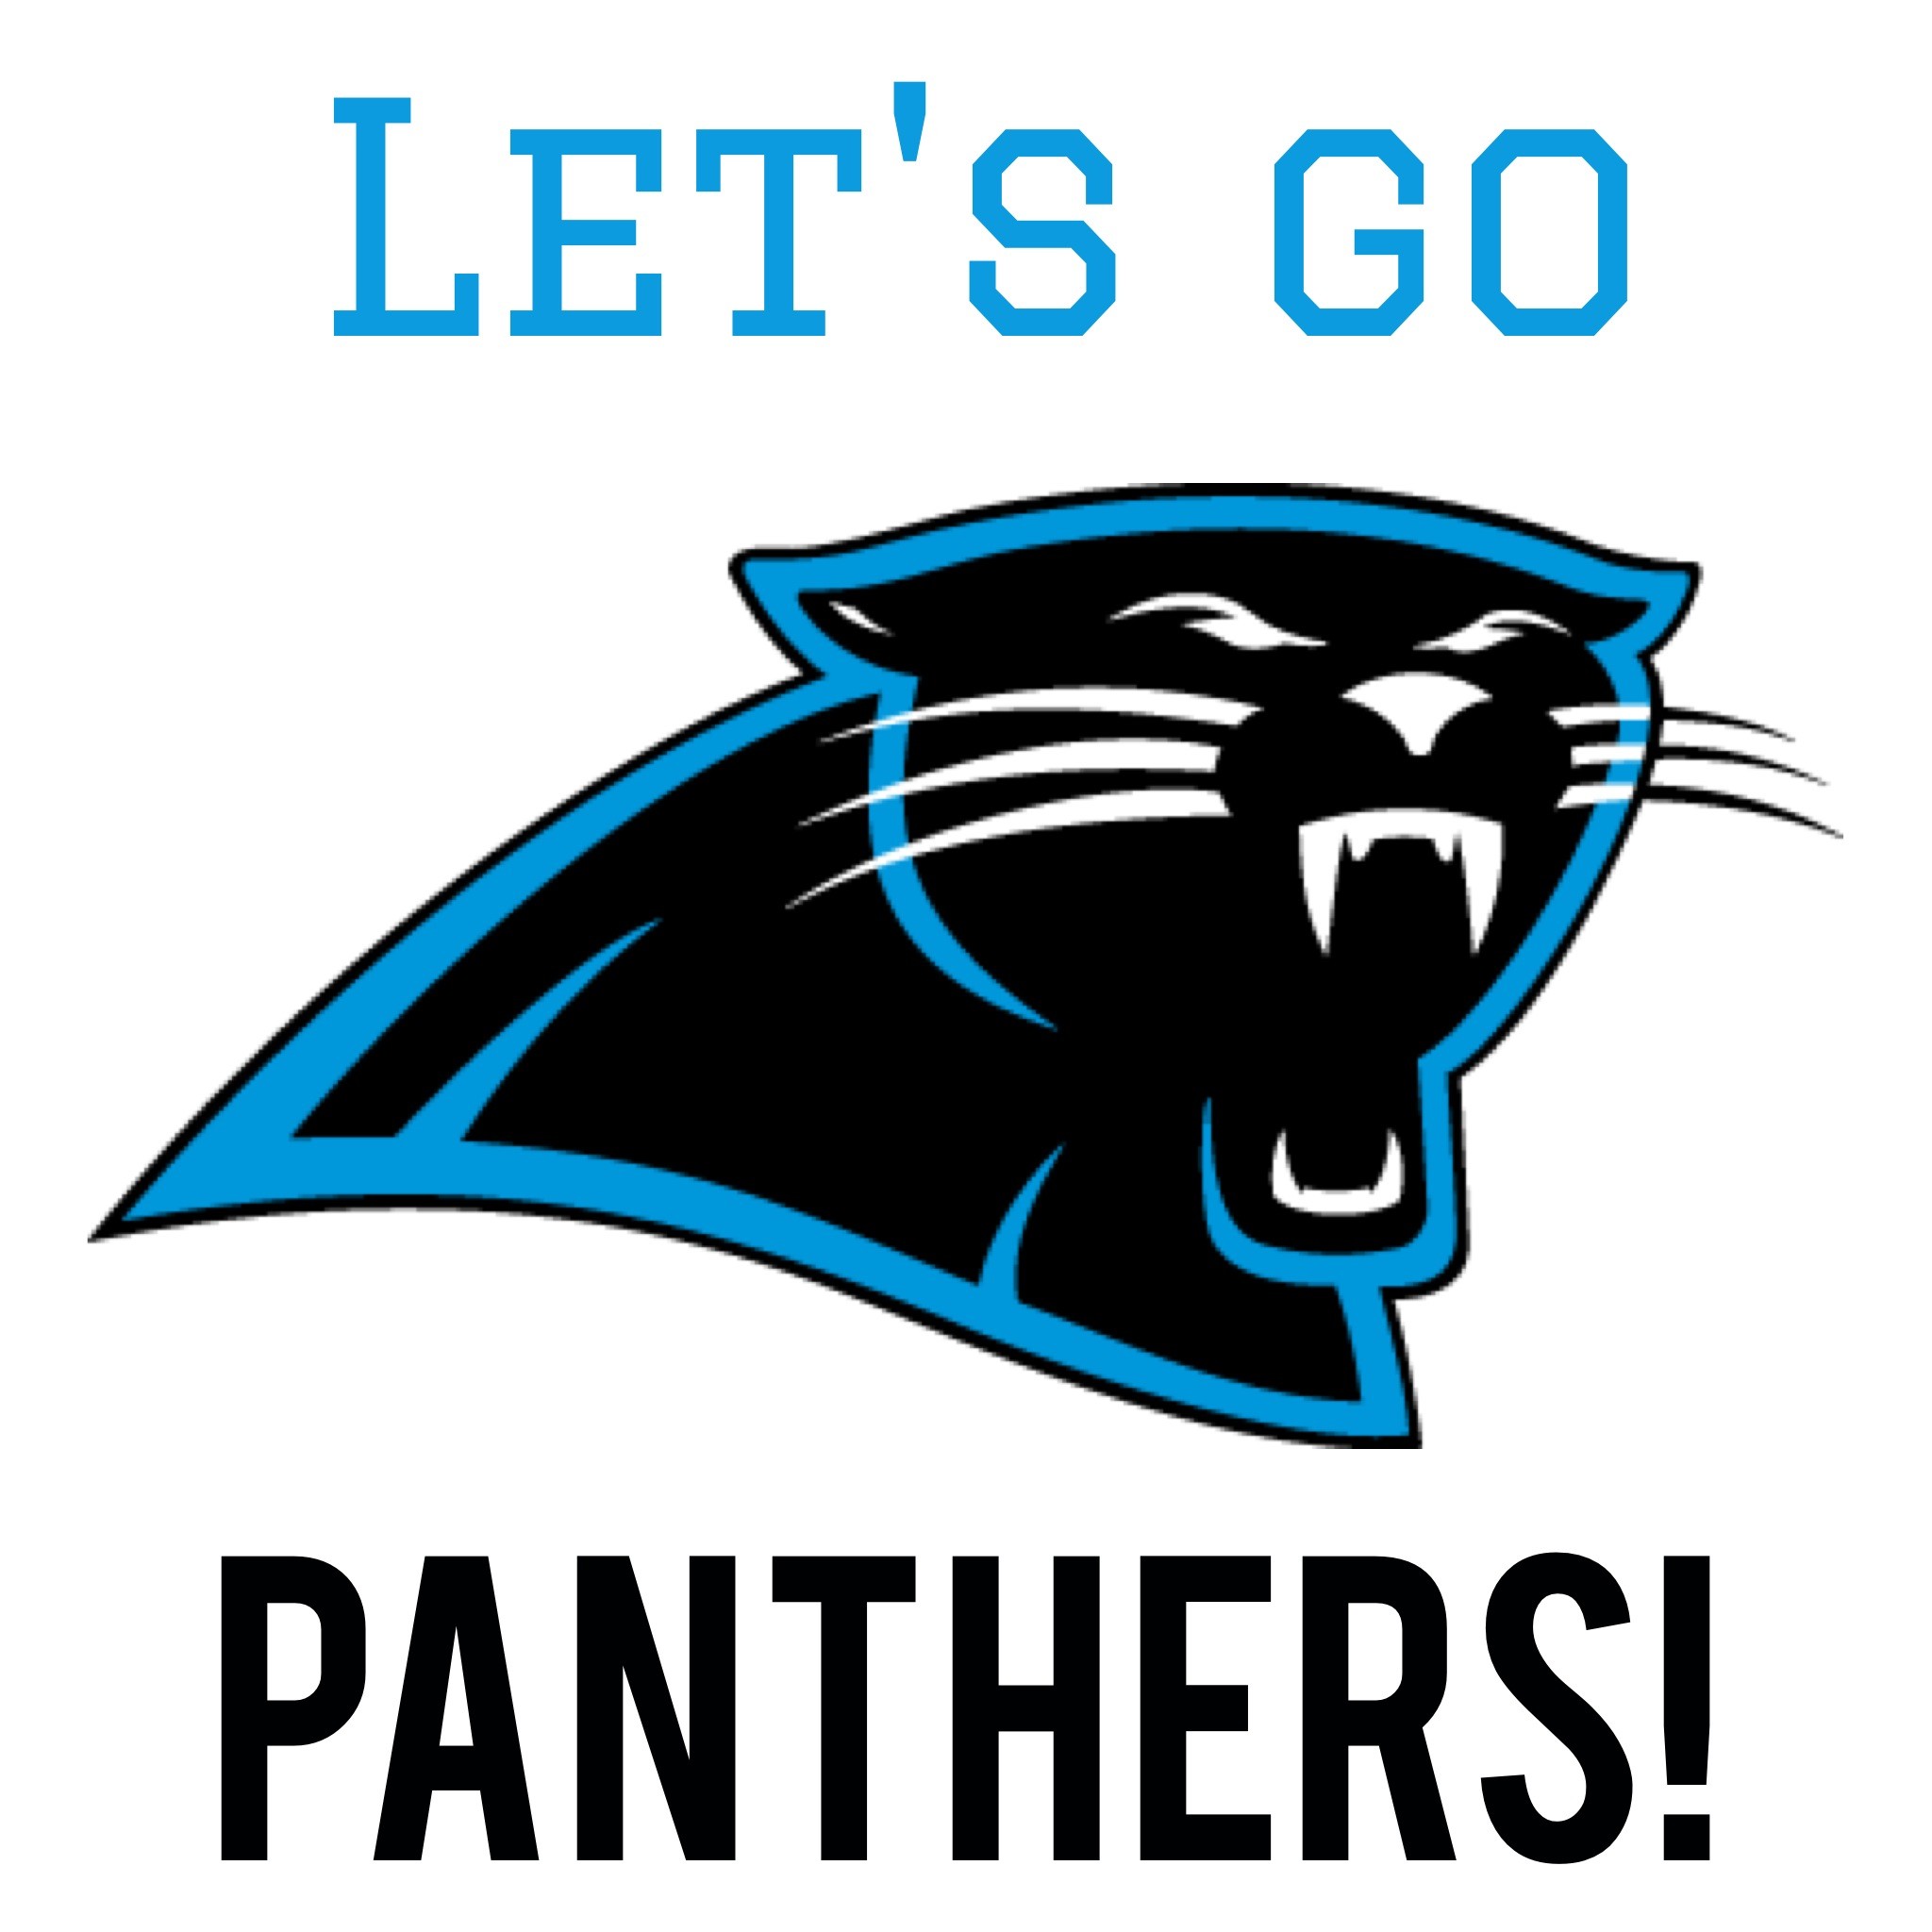 2048x2048 Essex Homes is cheering for our Carolina Panthers today!!! Let's Go Panthers!  Carolina Panthers WallpaperCarolina Panthers FootballPanther ...